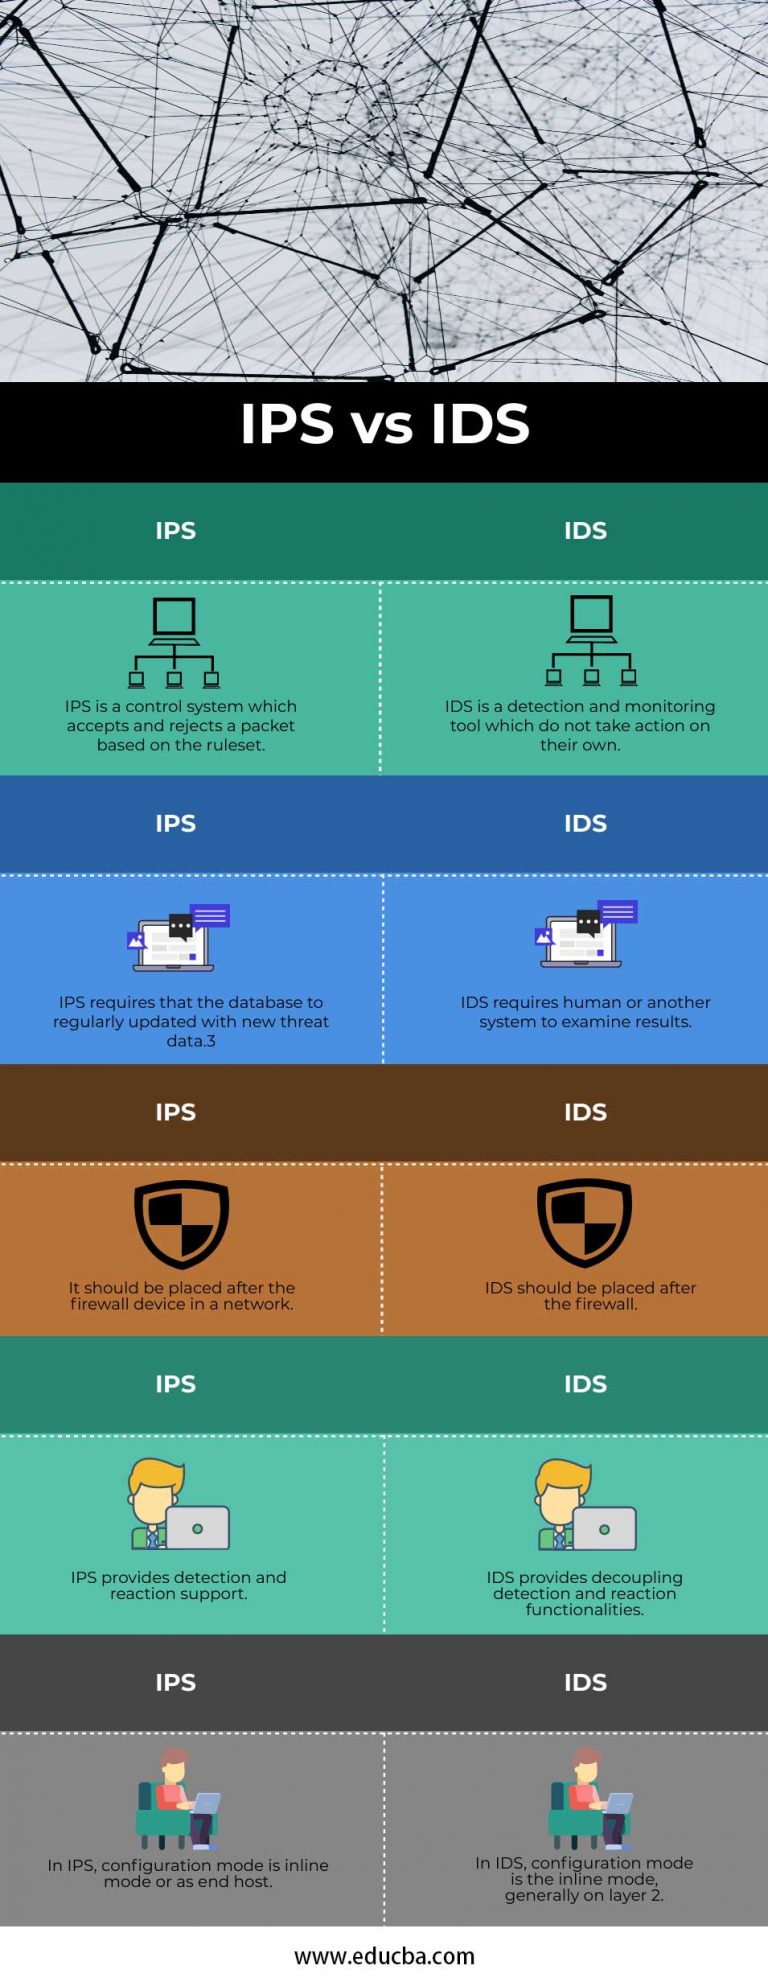 IPS vs IDS | Top Essential Differences of IPS vs IDS in Network Security